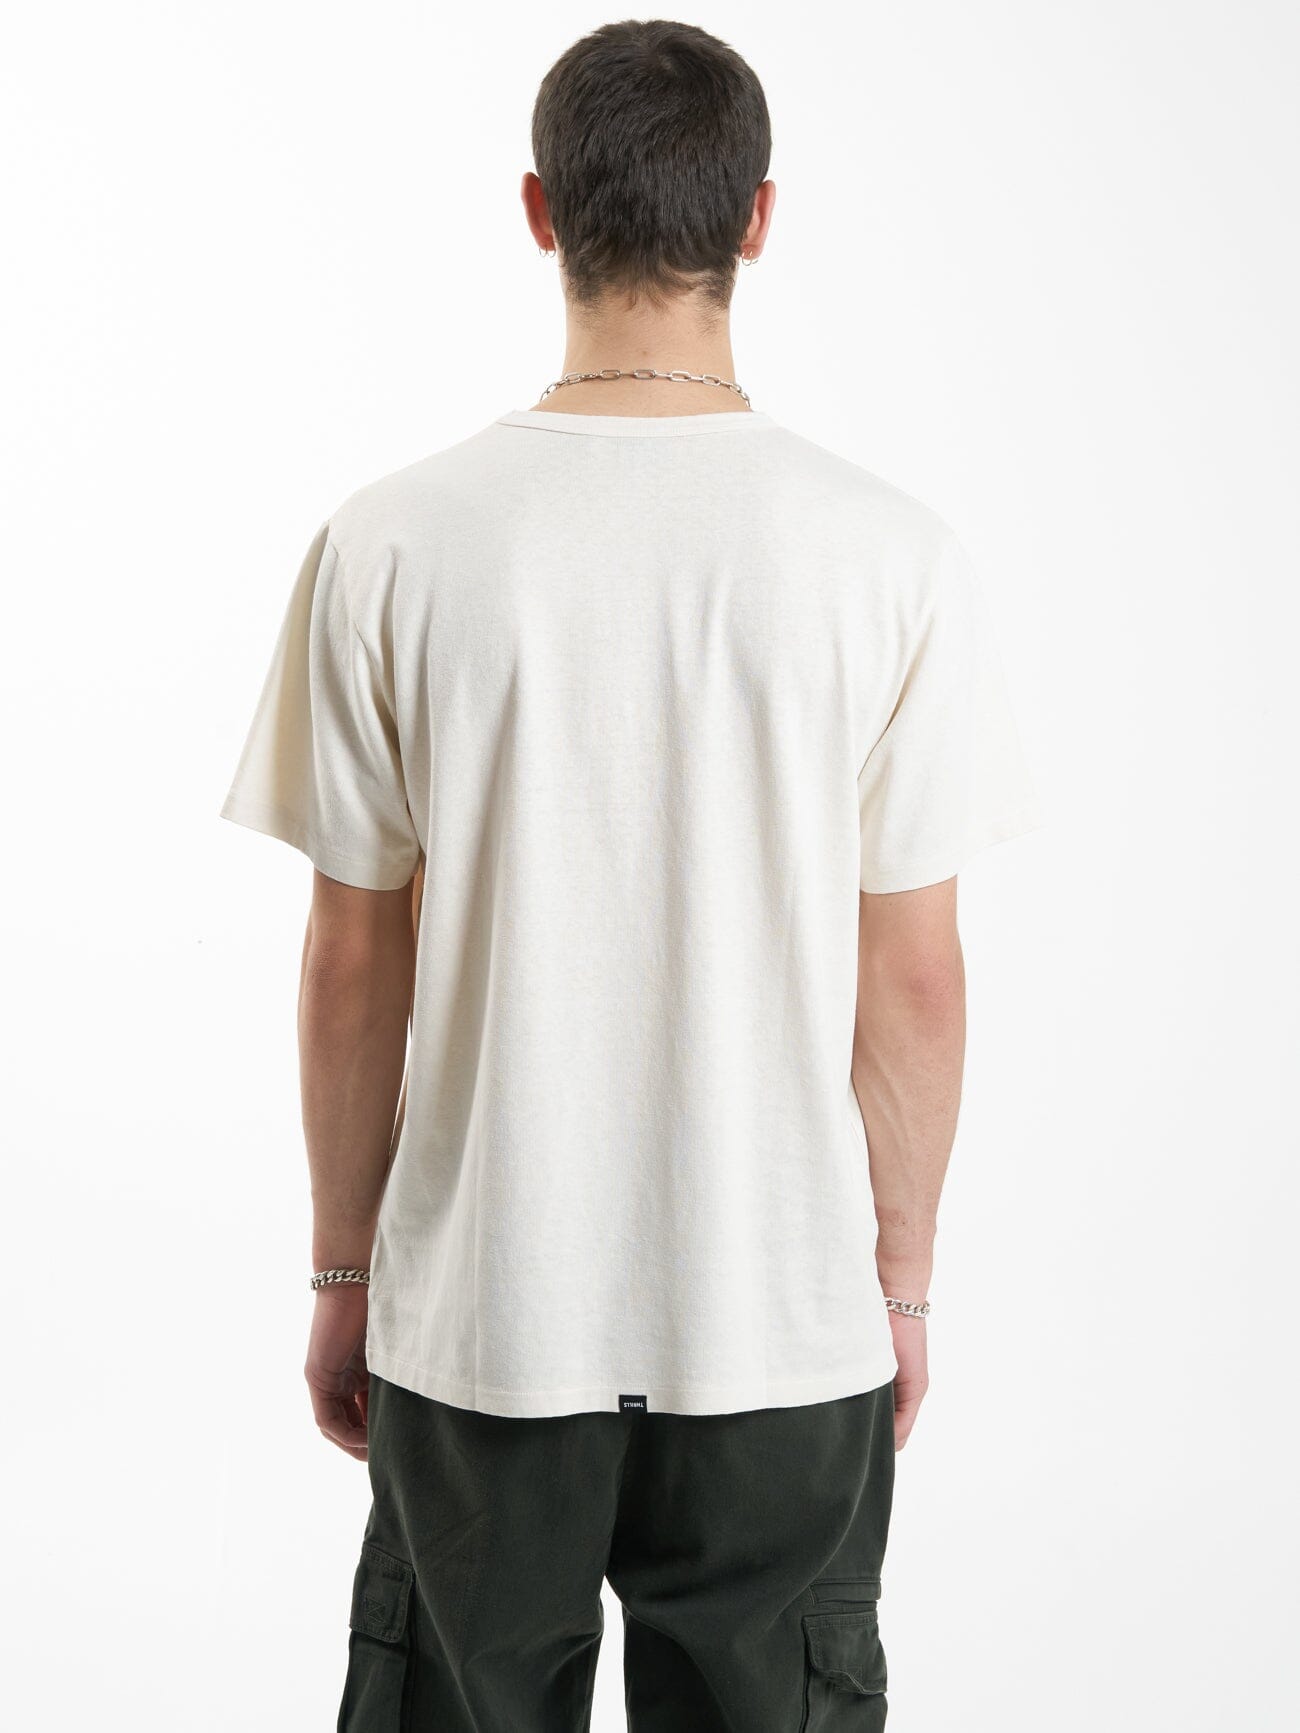 Hemp Experience Existence Merch Fit Tee - Heritage White